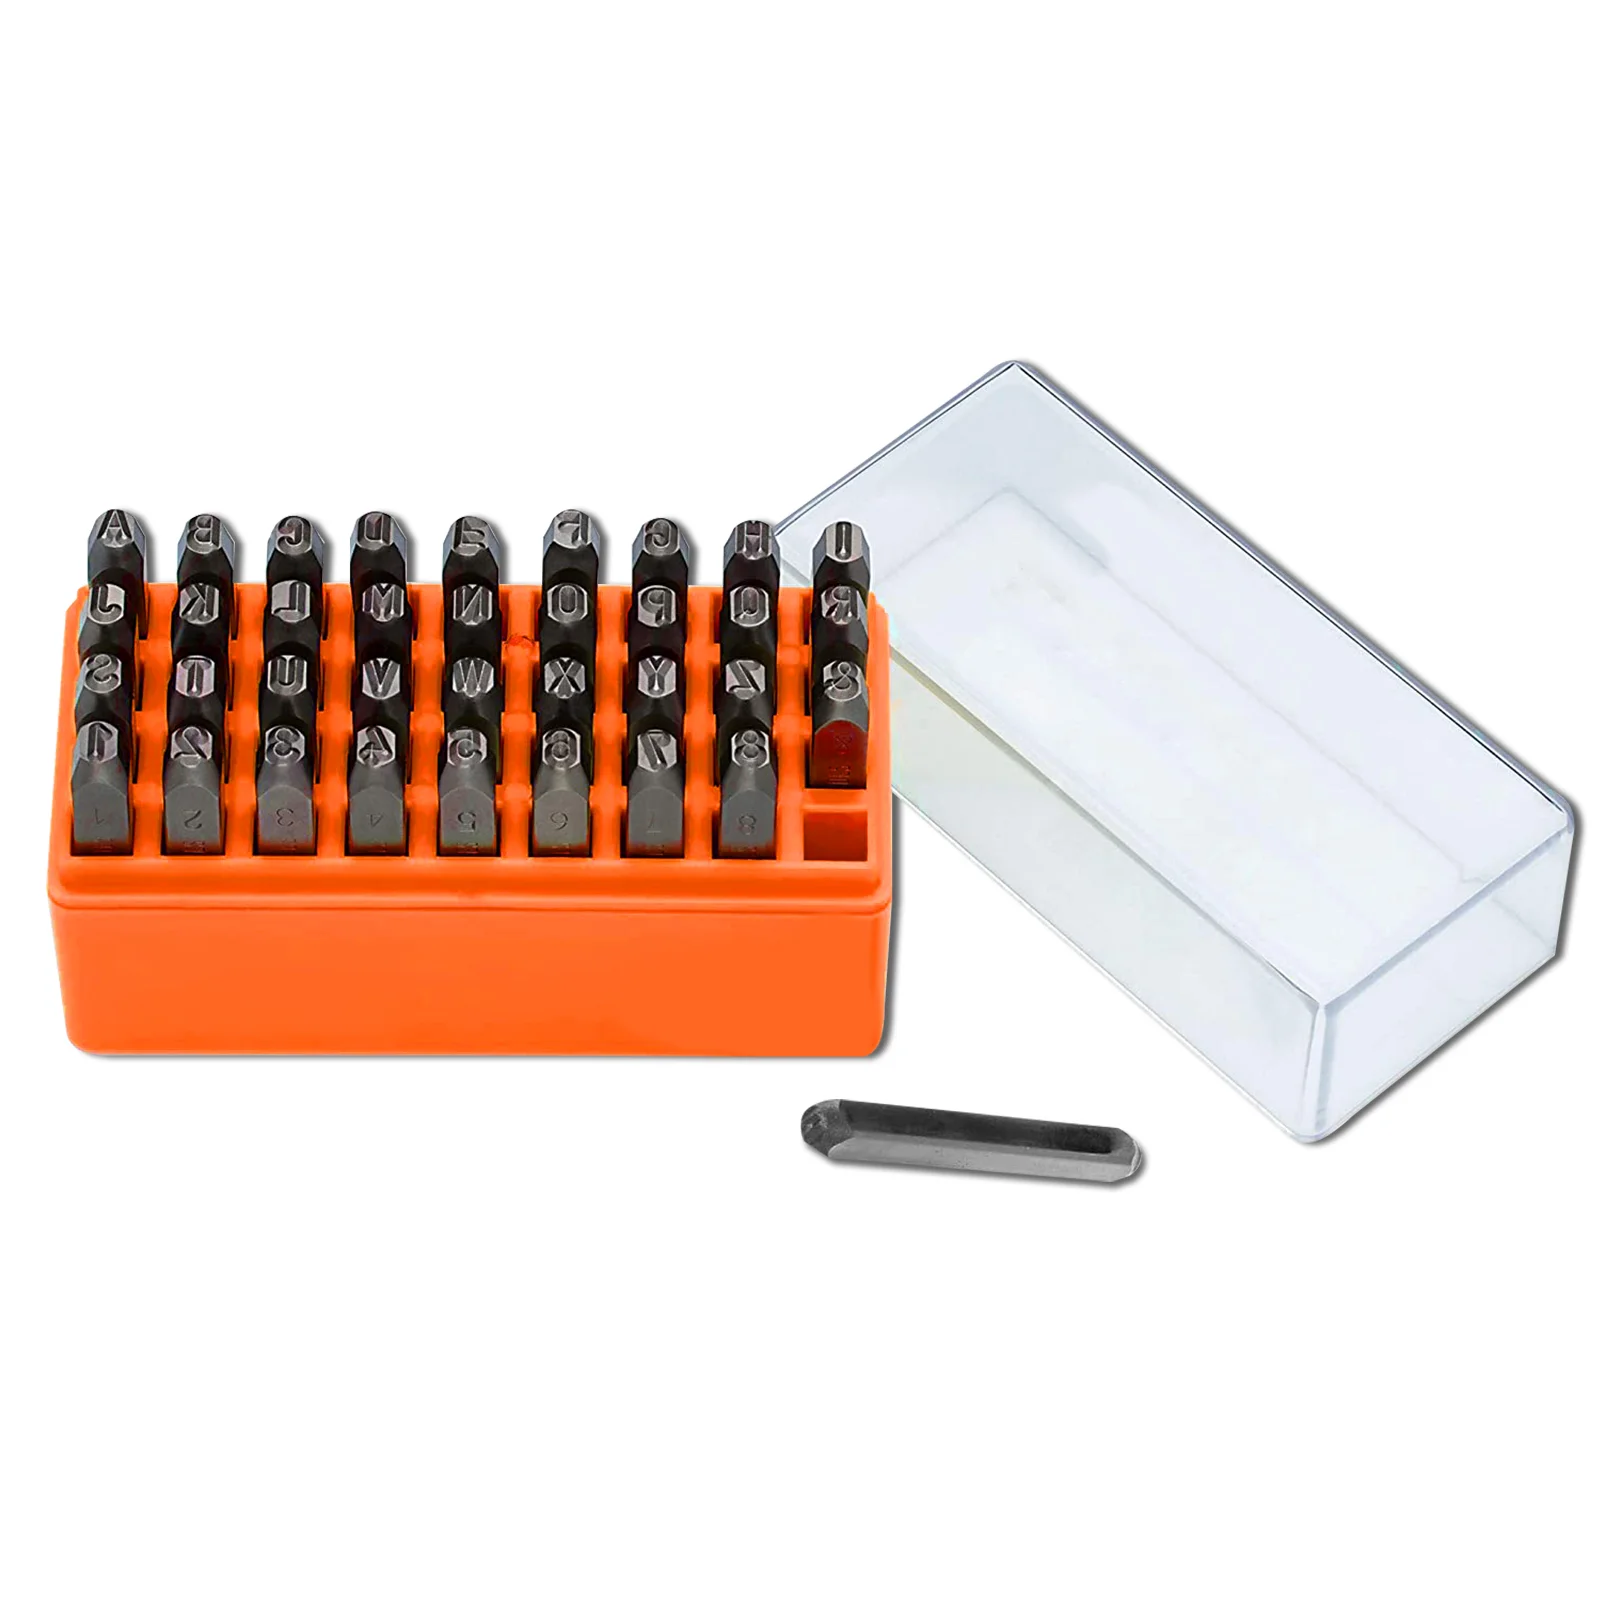 

36 Piece Steel Stamp Die Hobbyist Metal Letter And Number Punch Kit For Jewelry Making Steel Die Stamping Tool Jewelry Tool